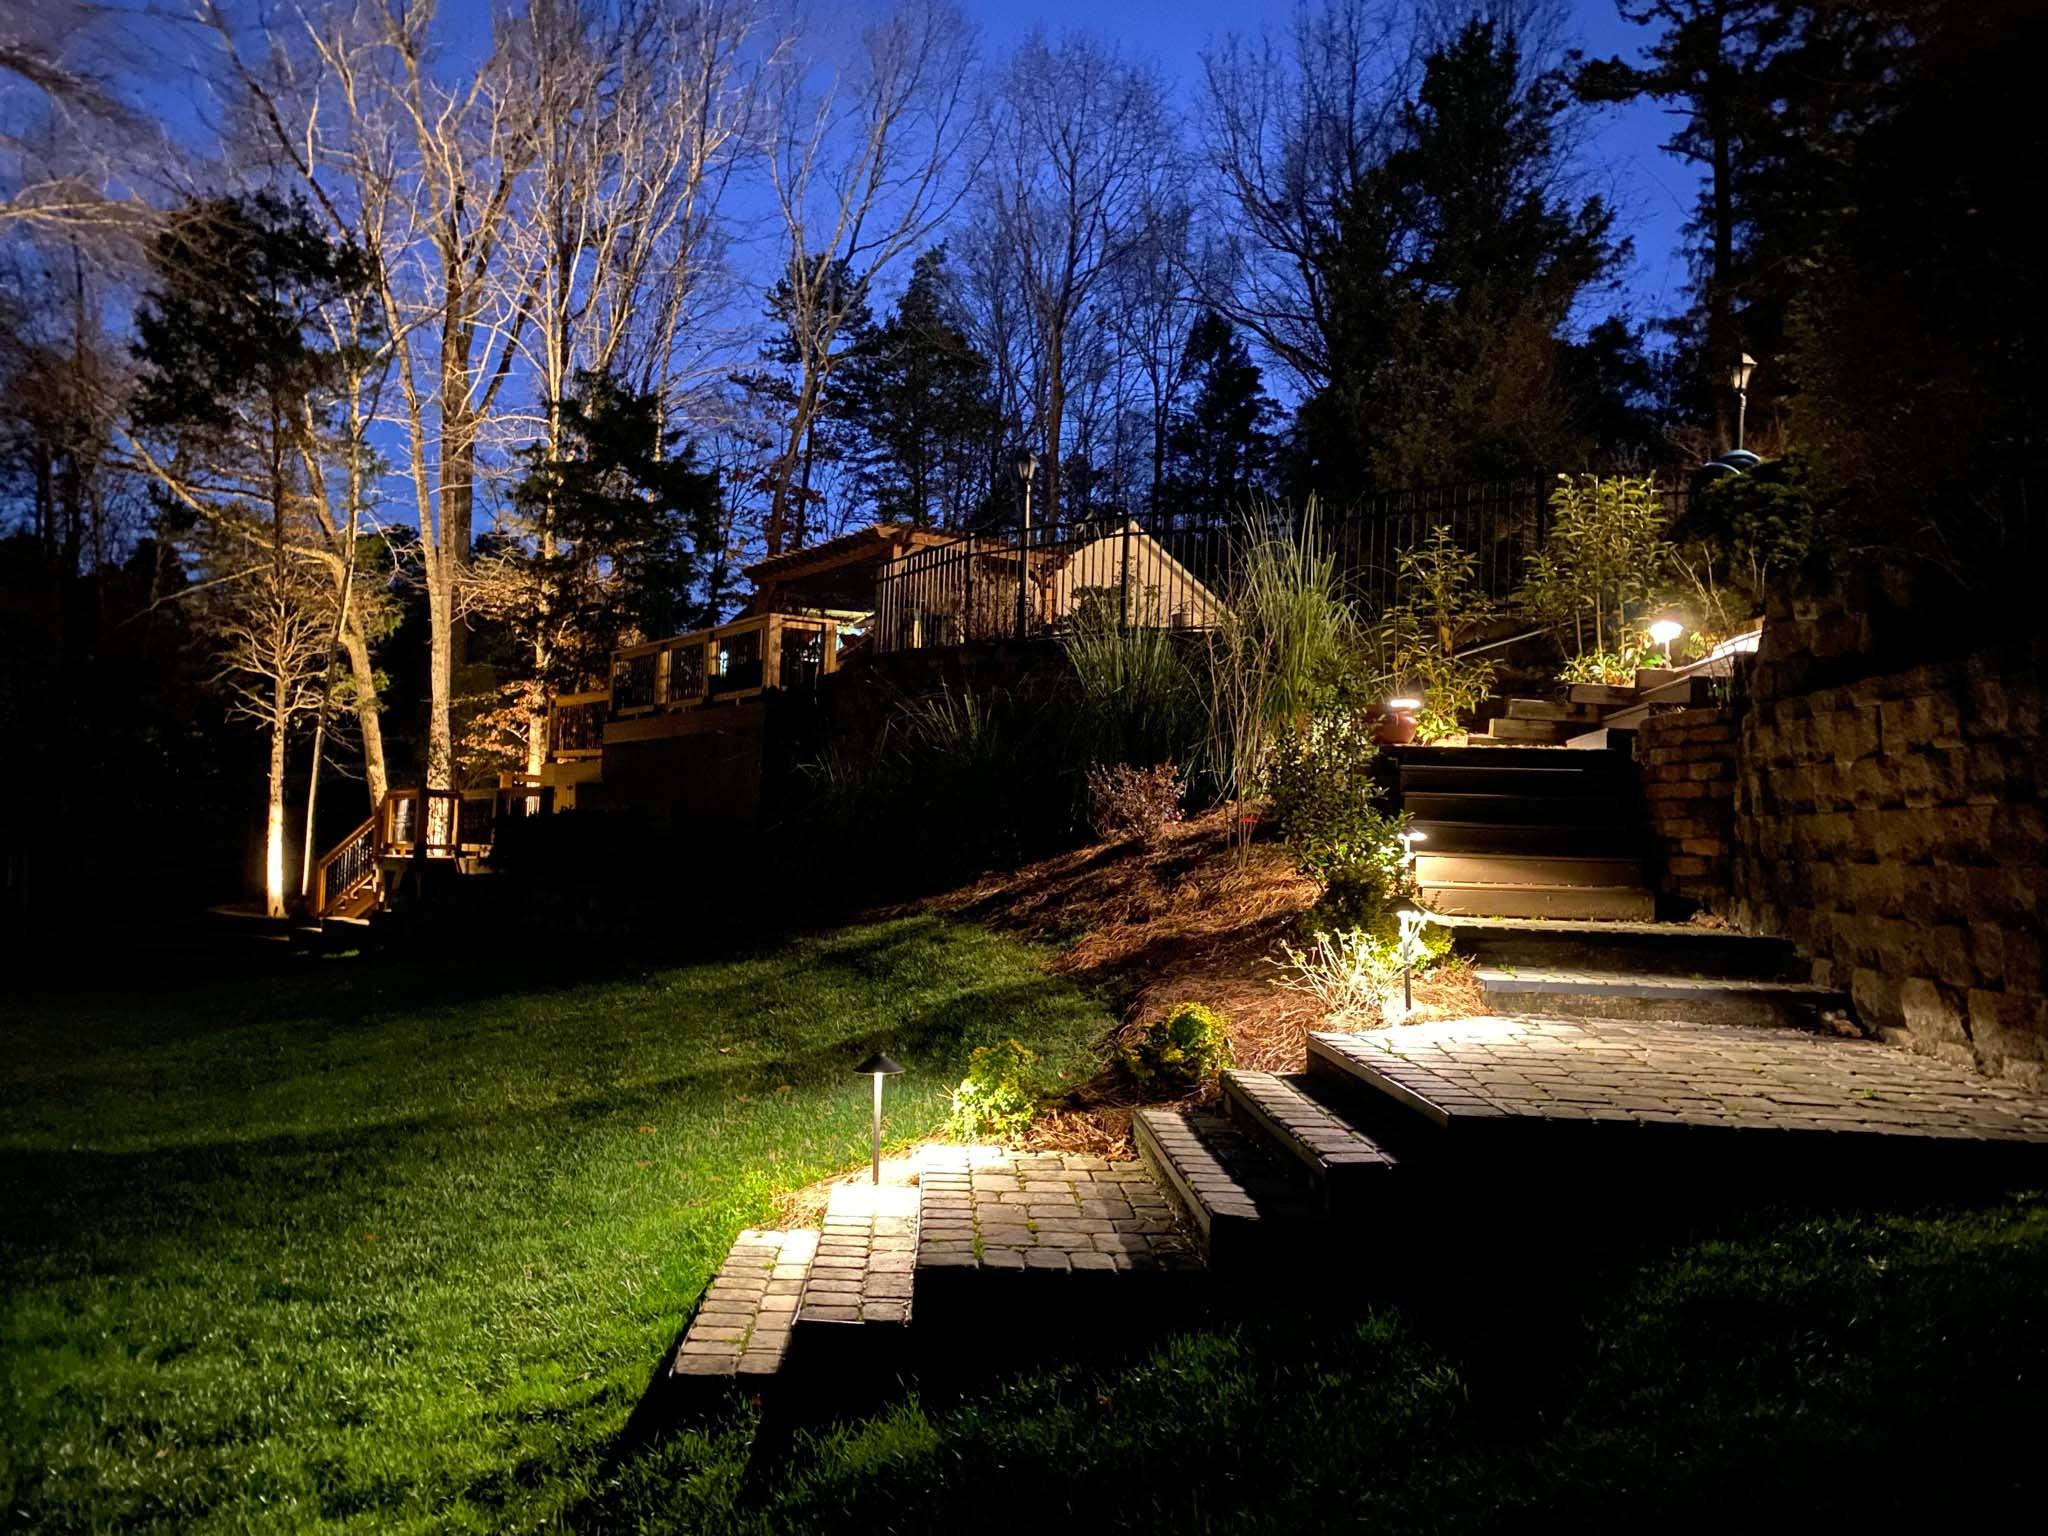  Paver steps illuminated with path lights with large trees illuminated in the background.  